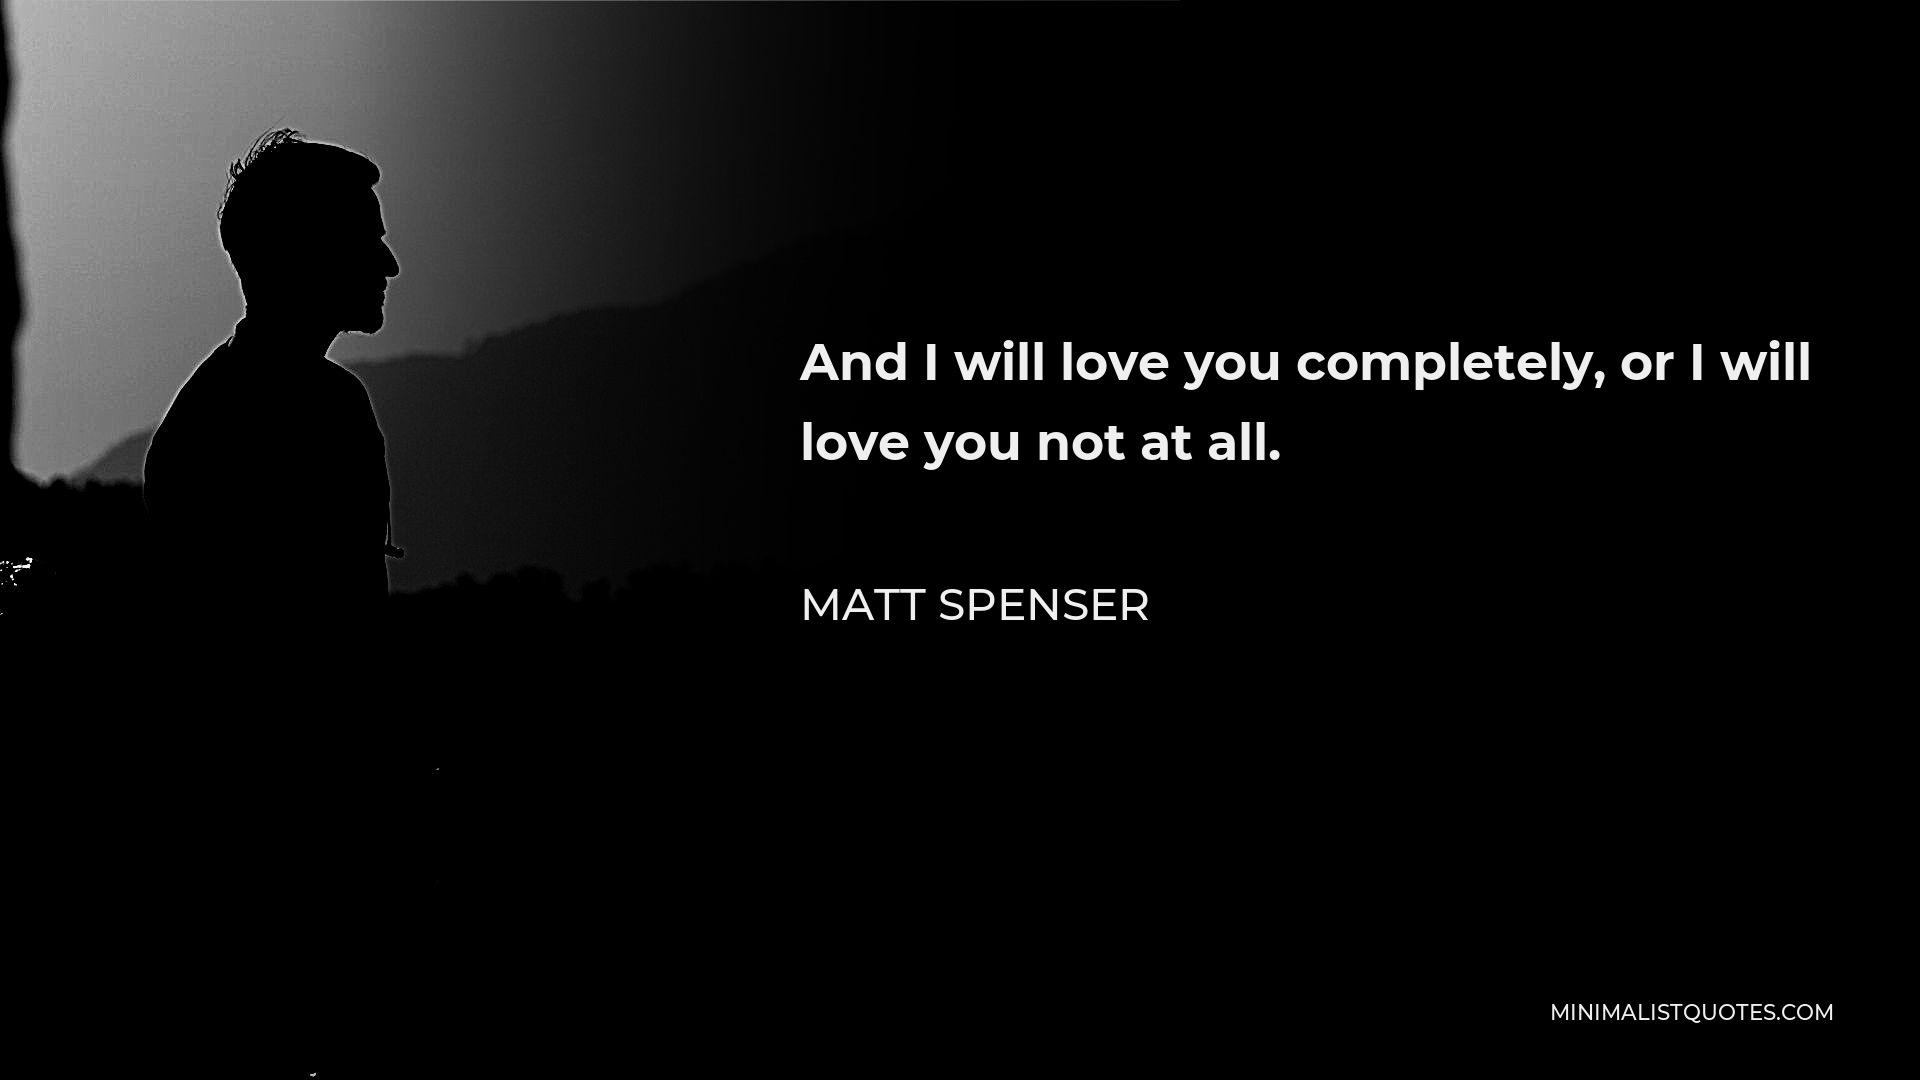 Matt Spenser Quote - And I will love you completely, or I will love you not at all.